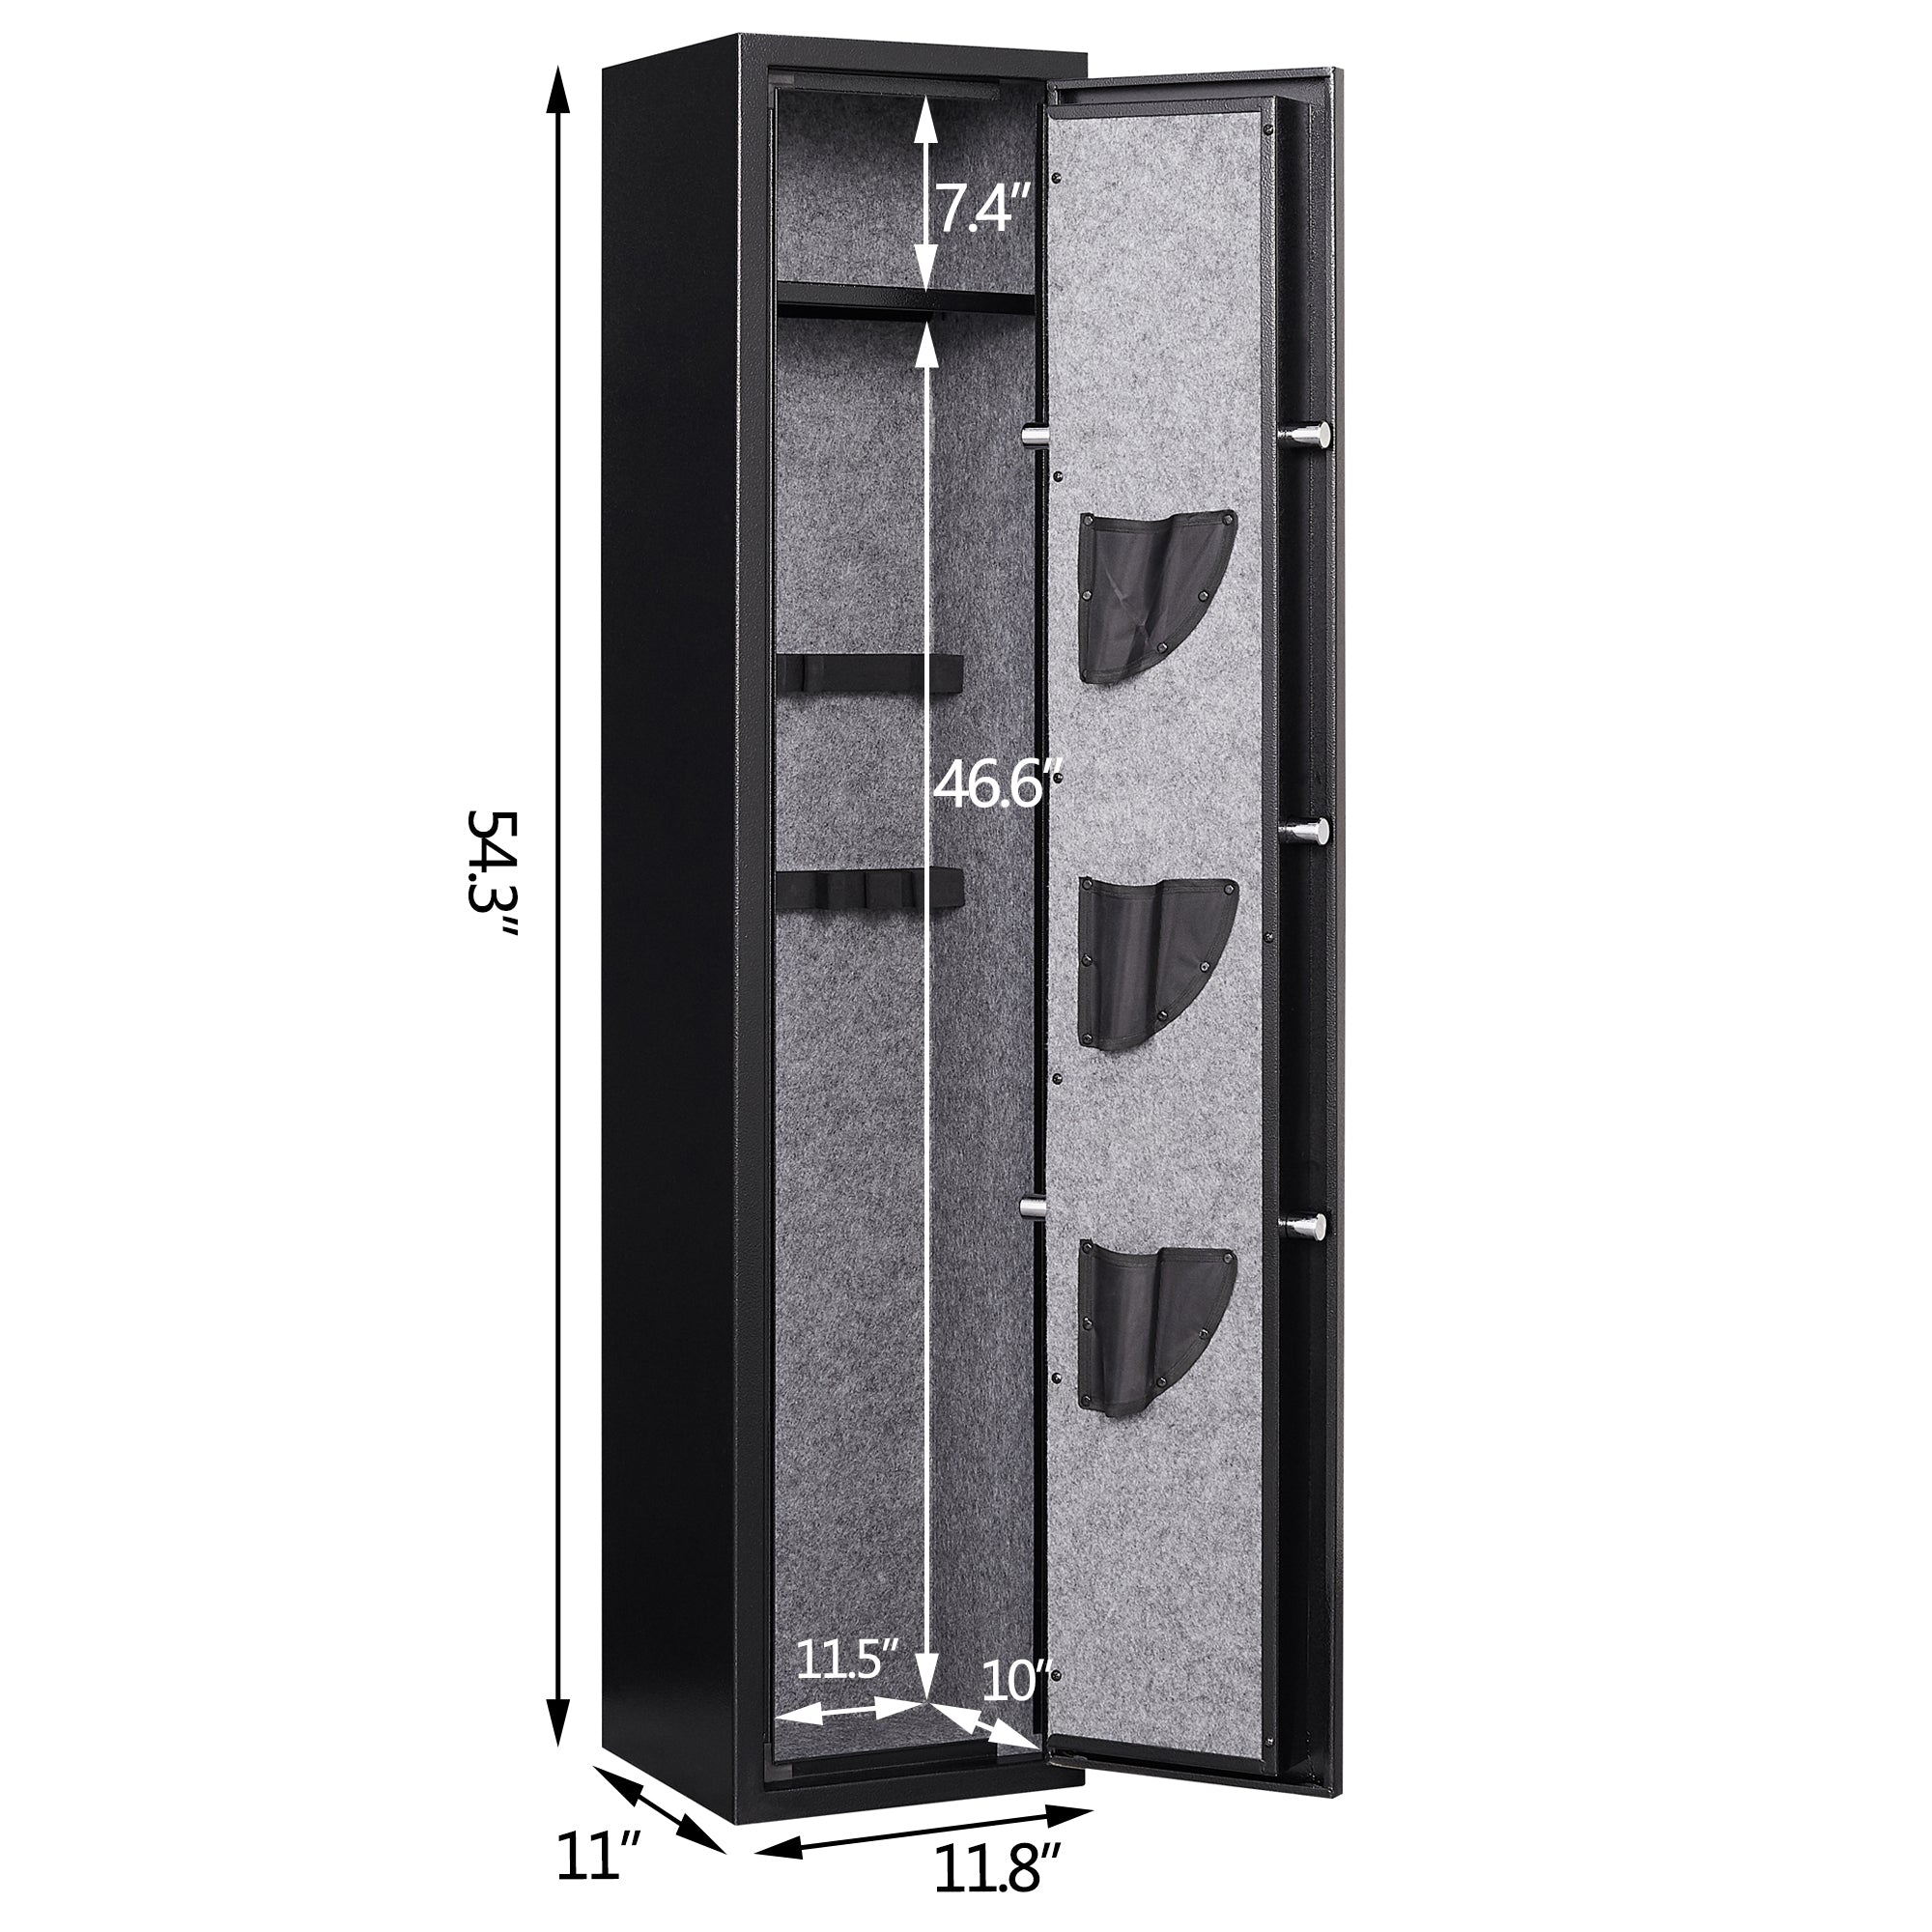 3 5 Gun Safes for Home Rifle and Pistols, Quick Access black-steel